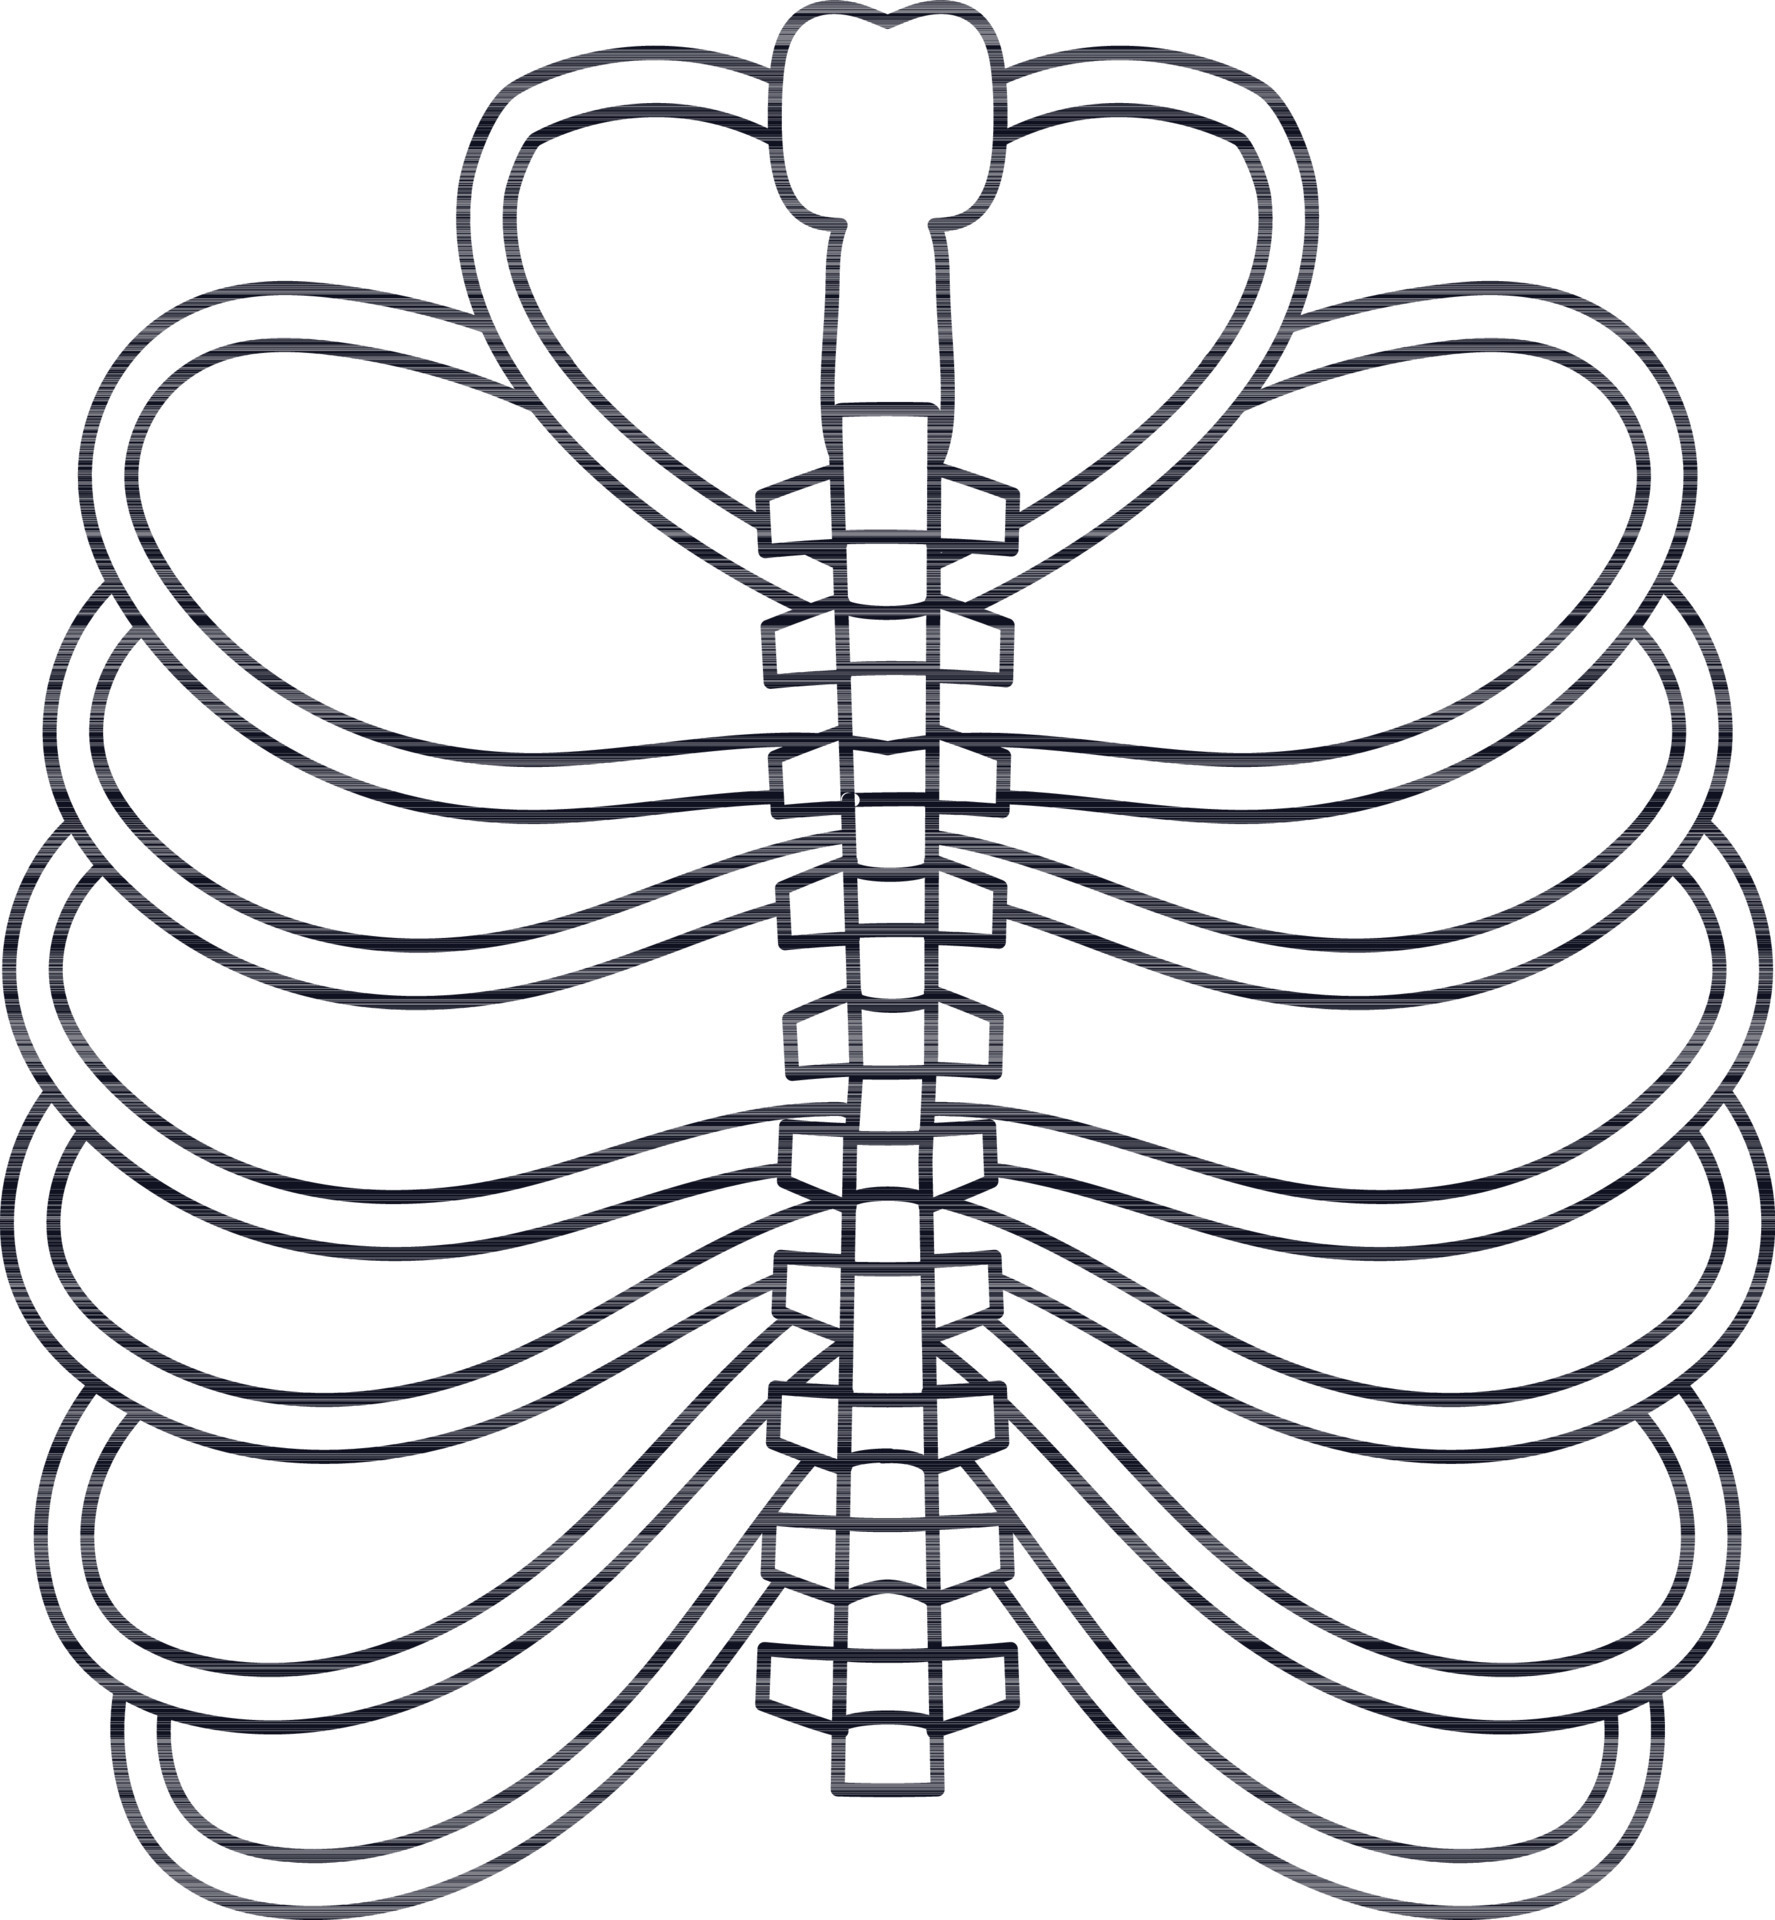 Picture of ribs inside body in stroke for protect heart. 24326827 ...